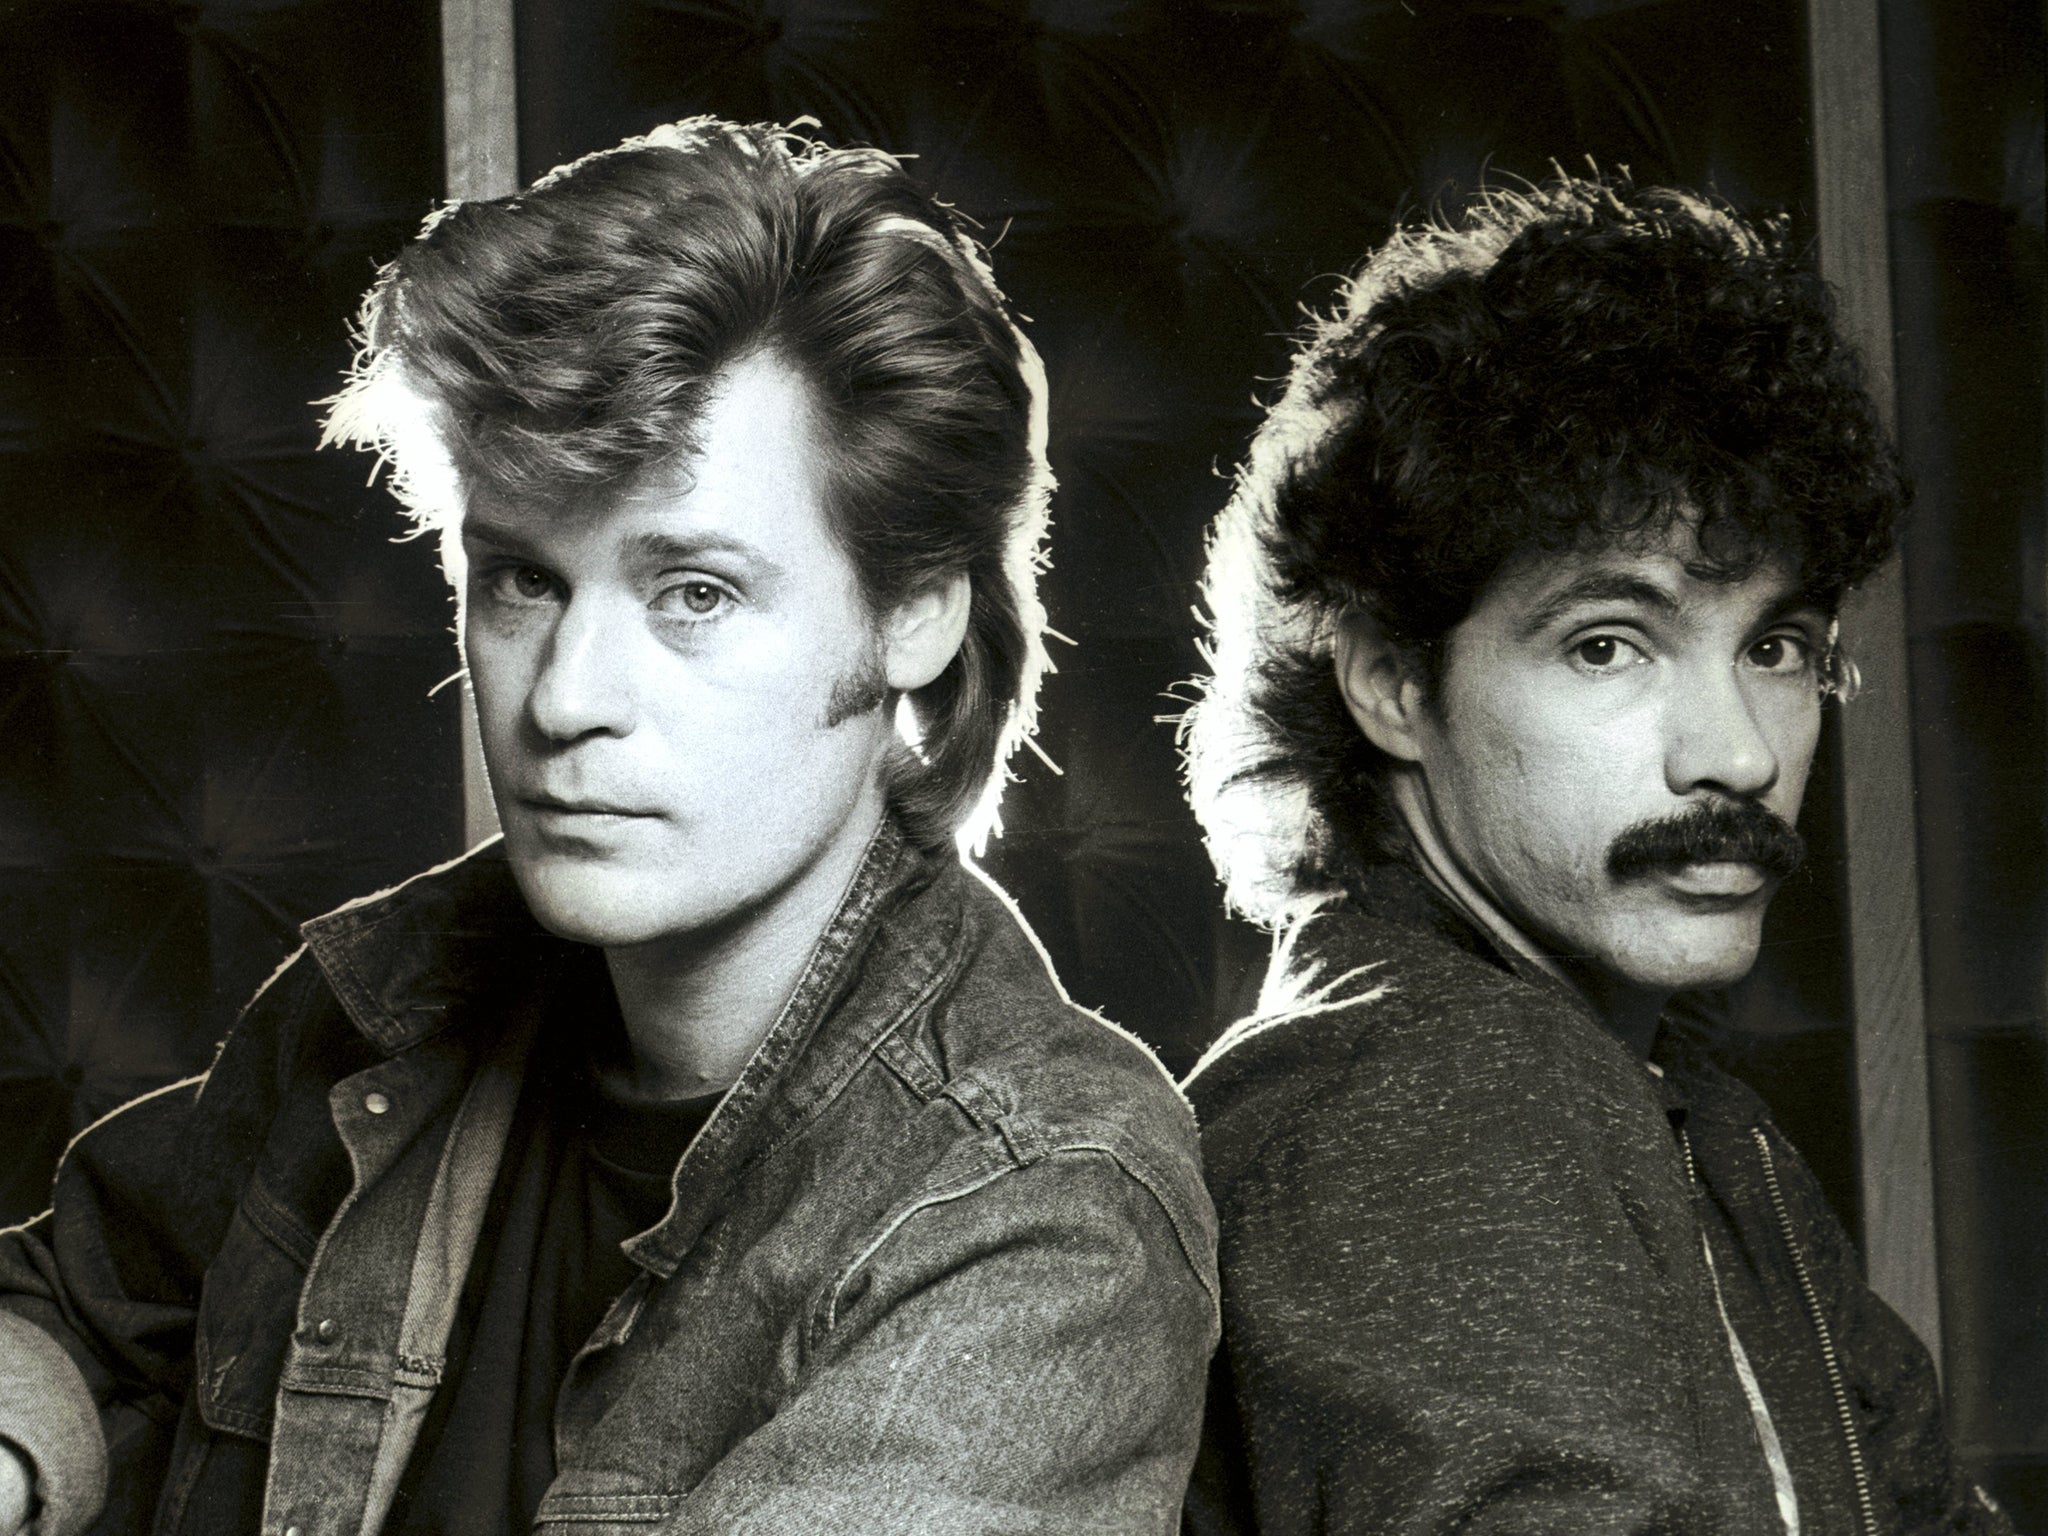 Daryl Hall & John Oates: 'Michael Jackson told me at Live Aid that “I Can't  Go For That” had inspired “Billie Jean”